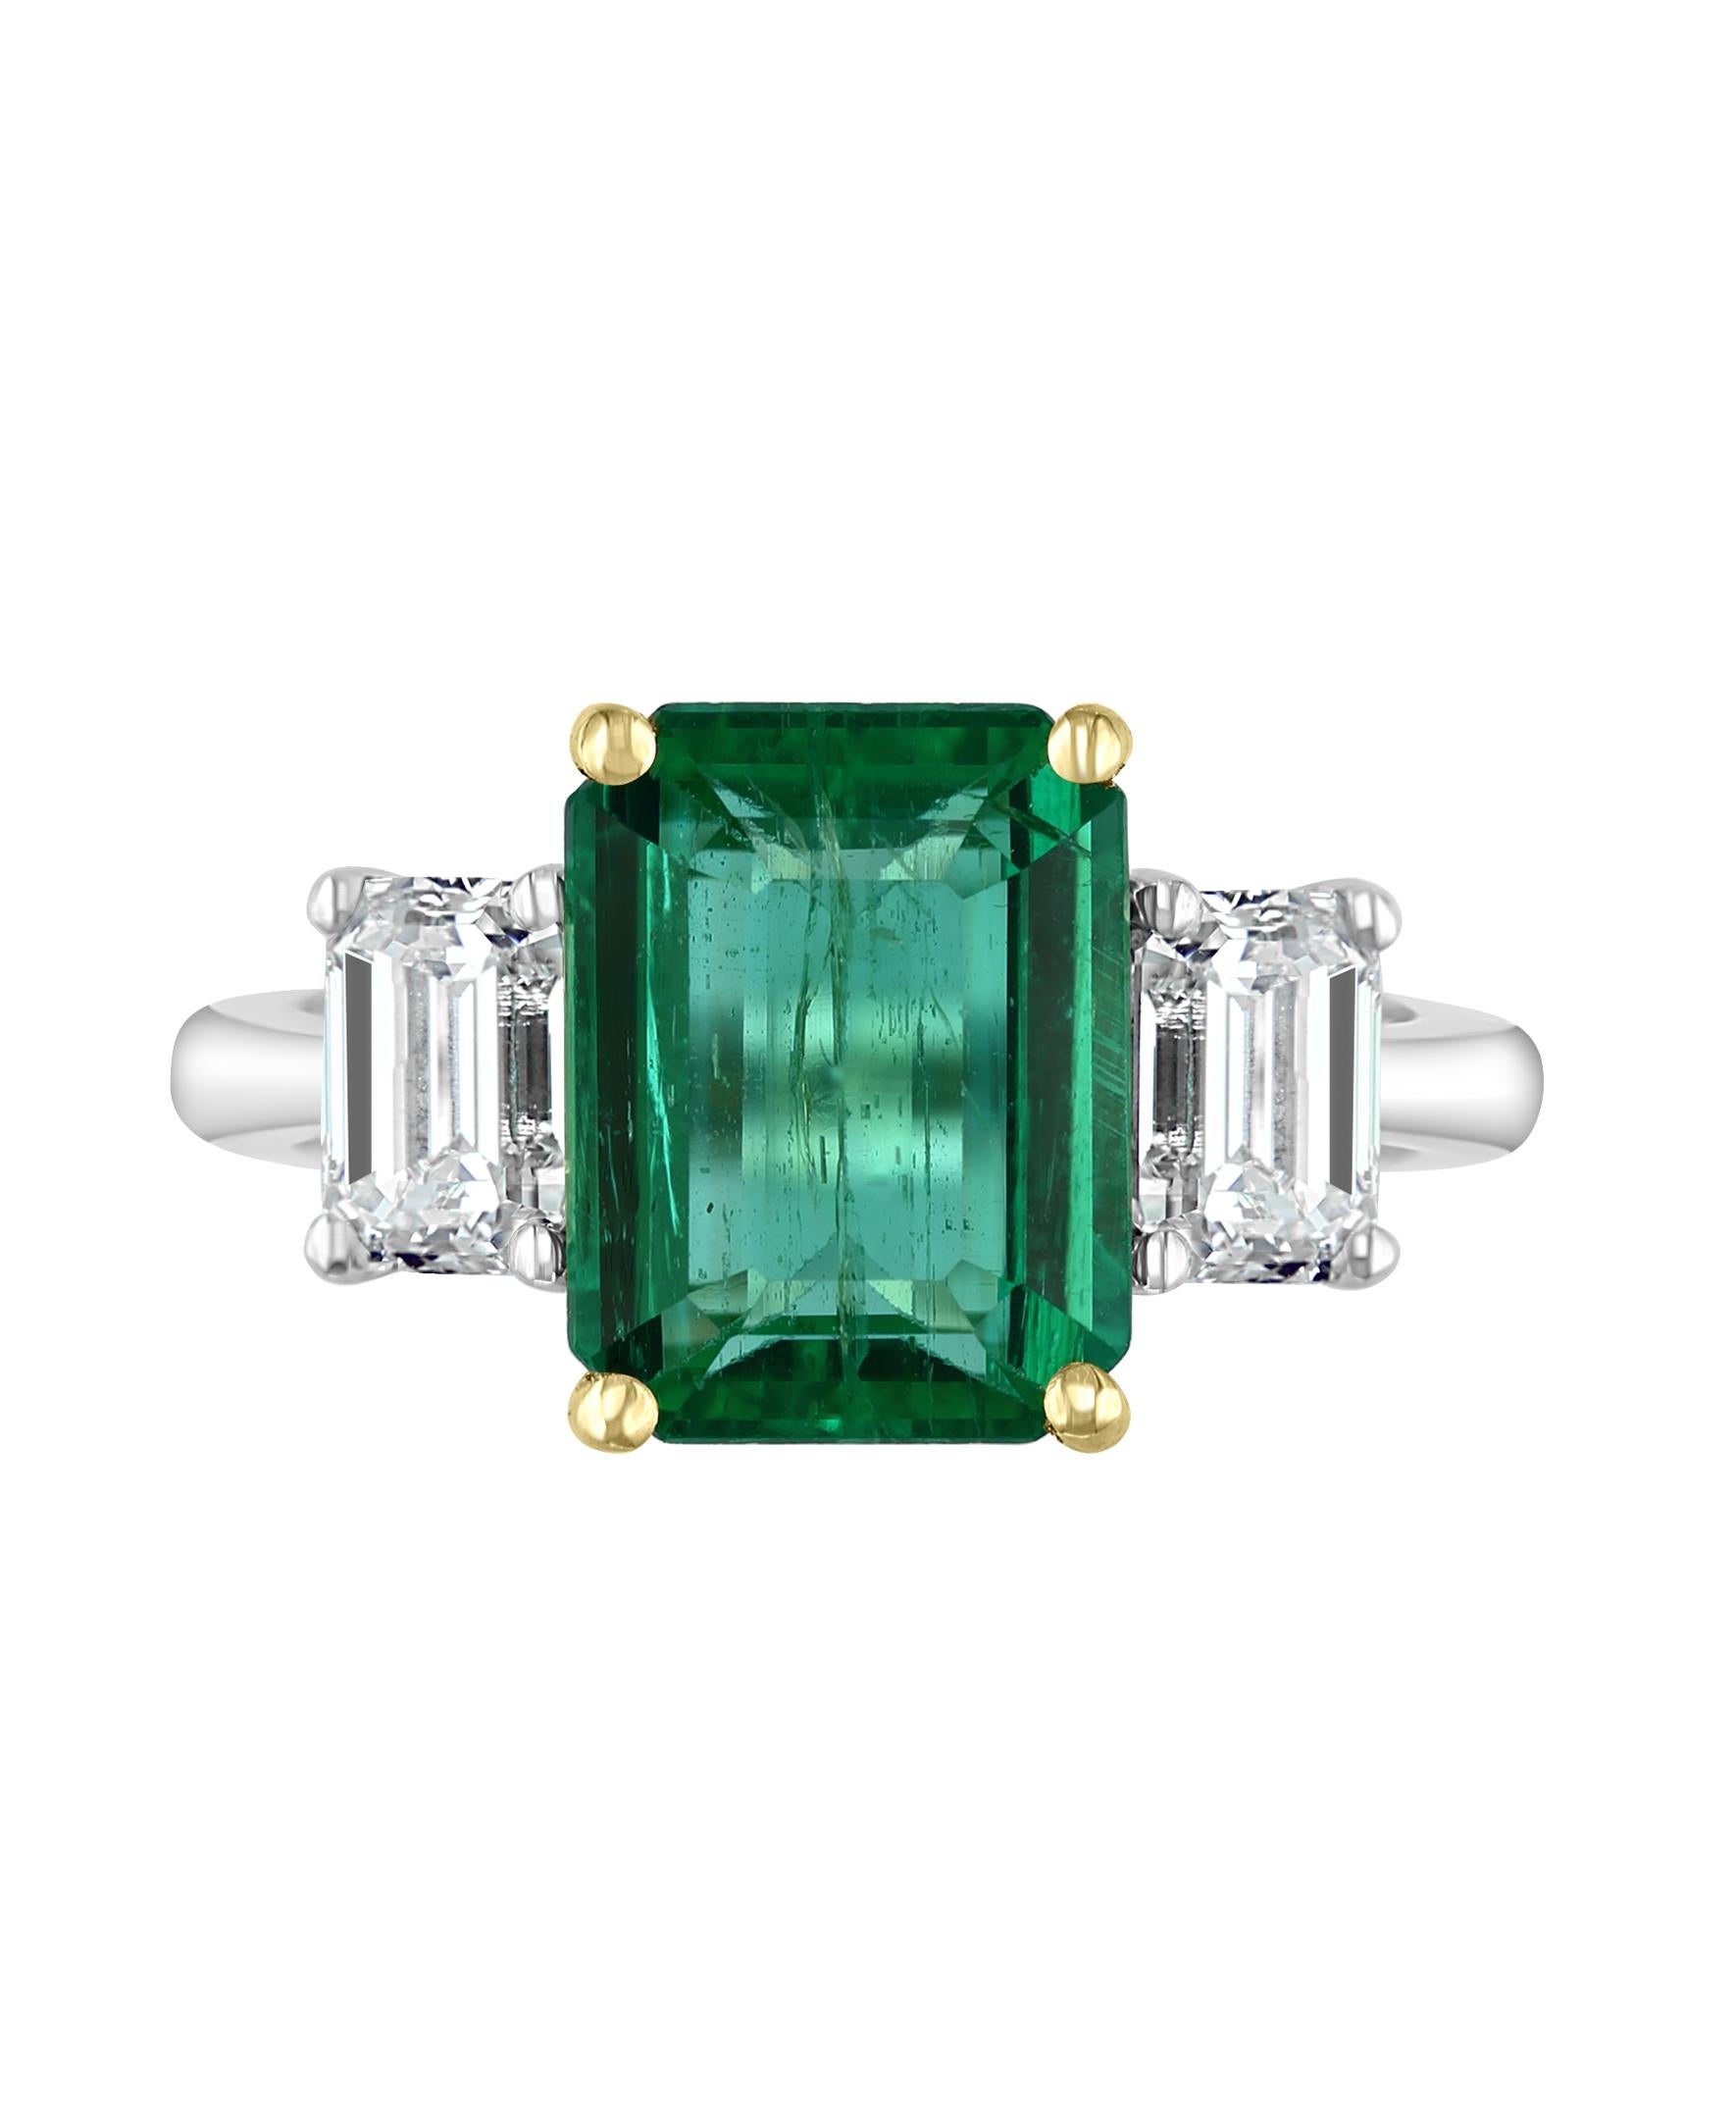 This Effy Hematian design ring is set in 18K White Gold, with 18K Yellow gold prongs holding the center stone Emerald. 
The center stone Emerald is an Emerald cut shape and weighs 3.29 ct.
Surrounded by two baguette cut diamonds with a weight of